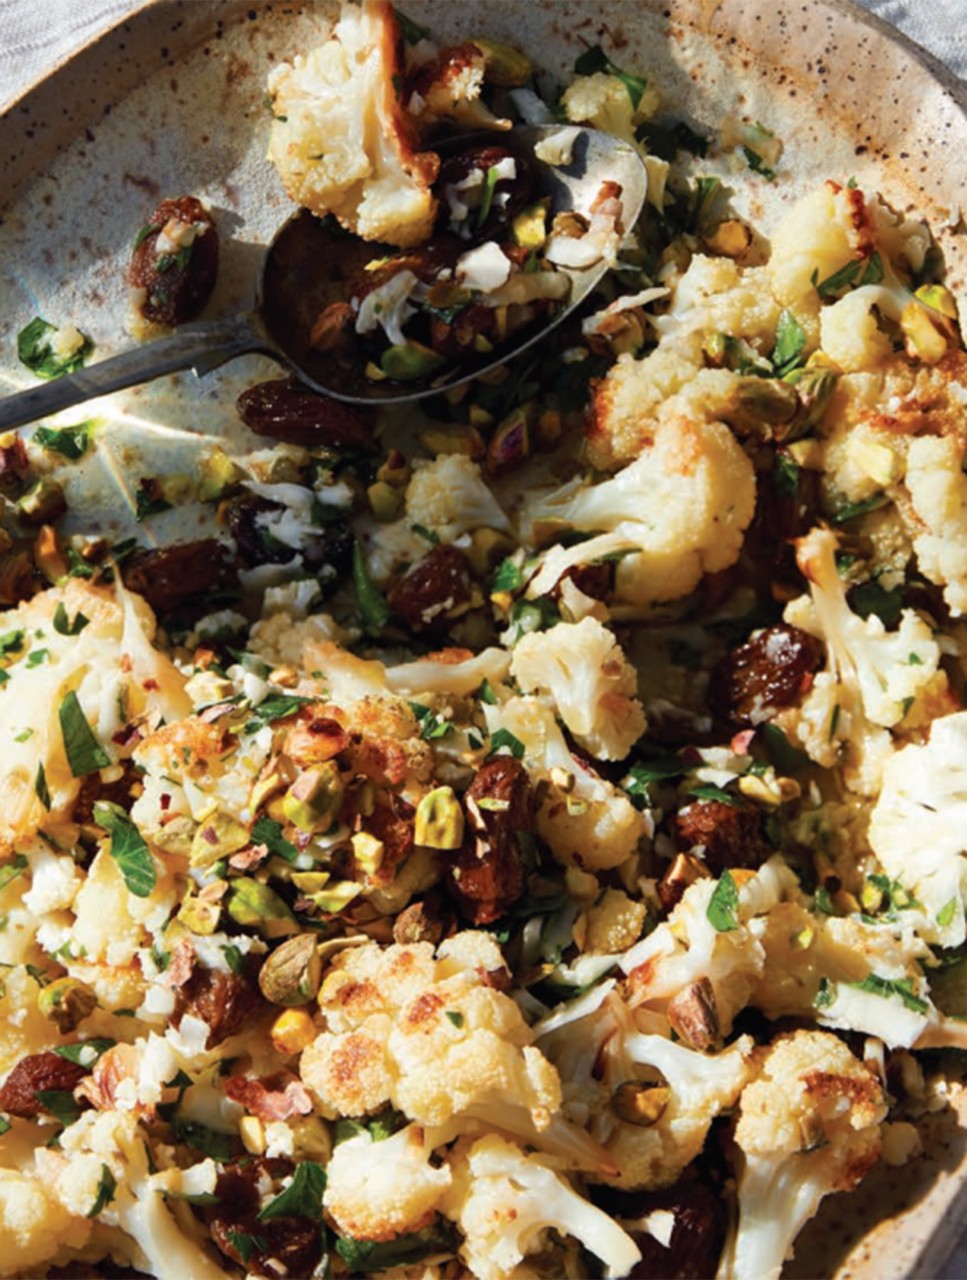 Roasted Cauliflower & Oven-Dried Grapes